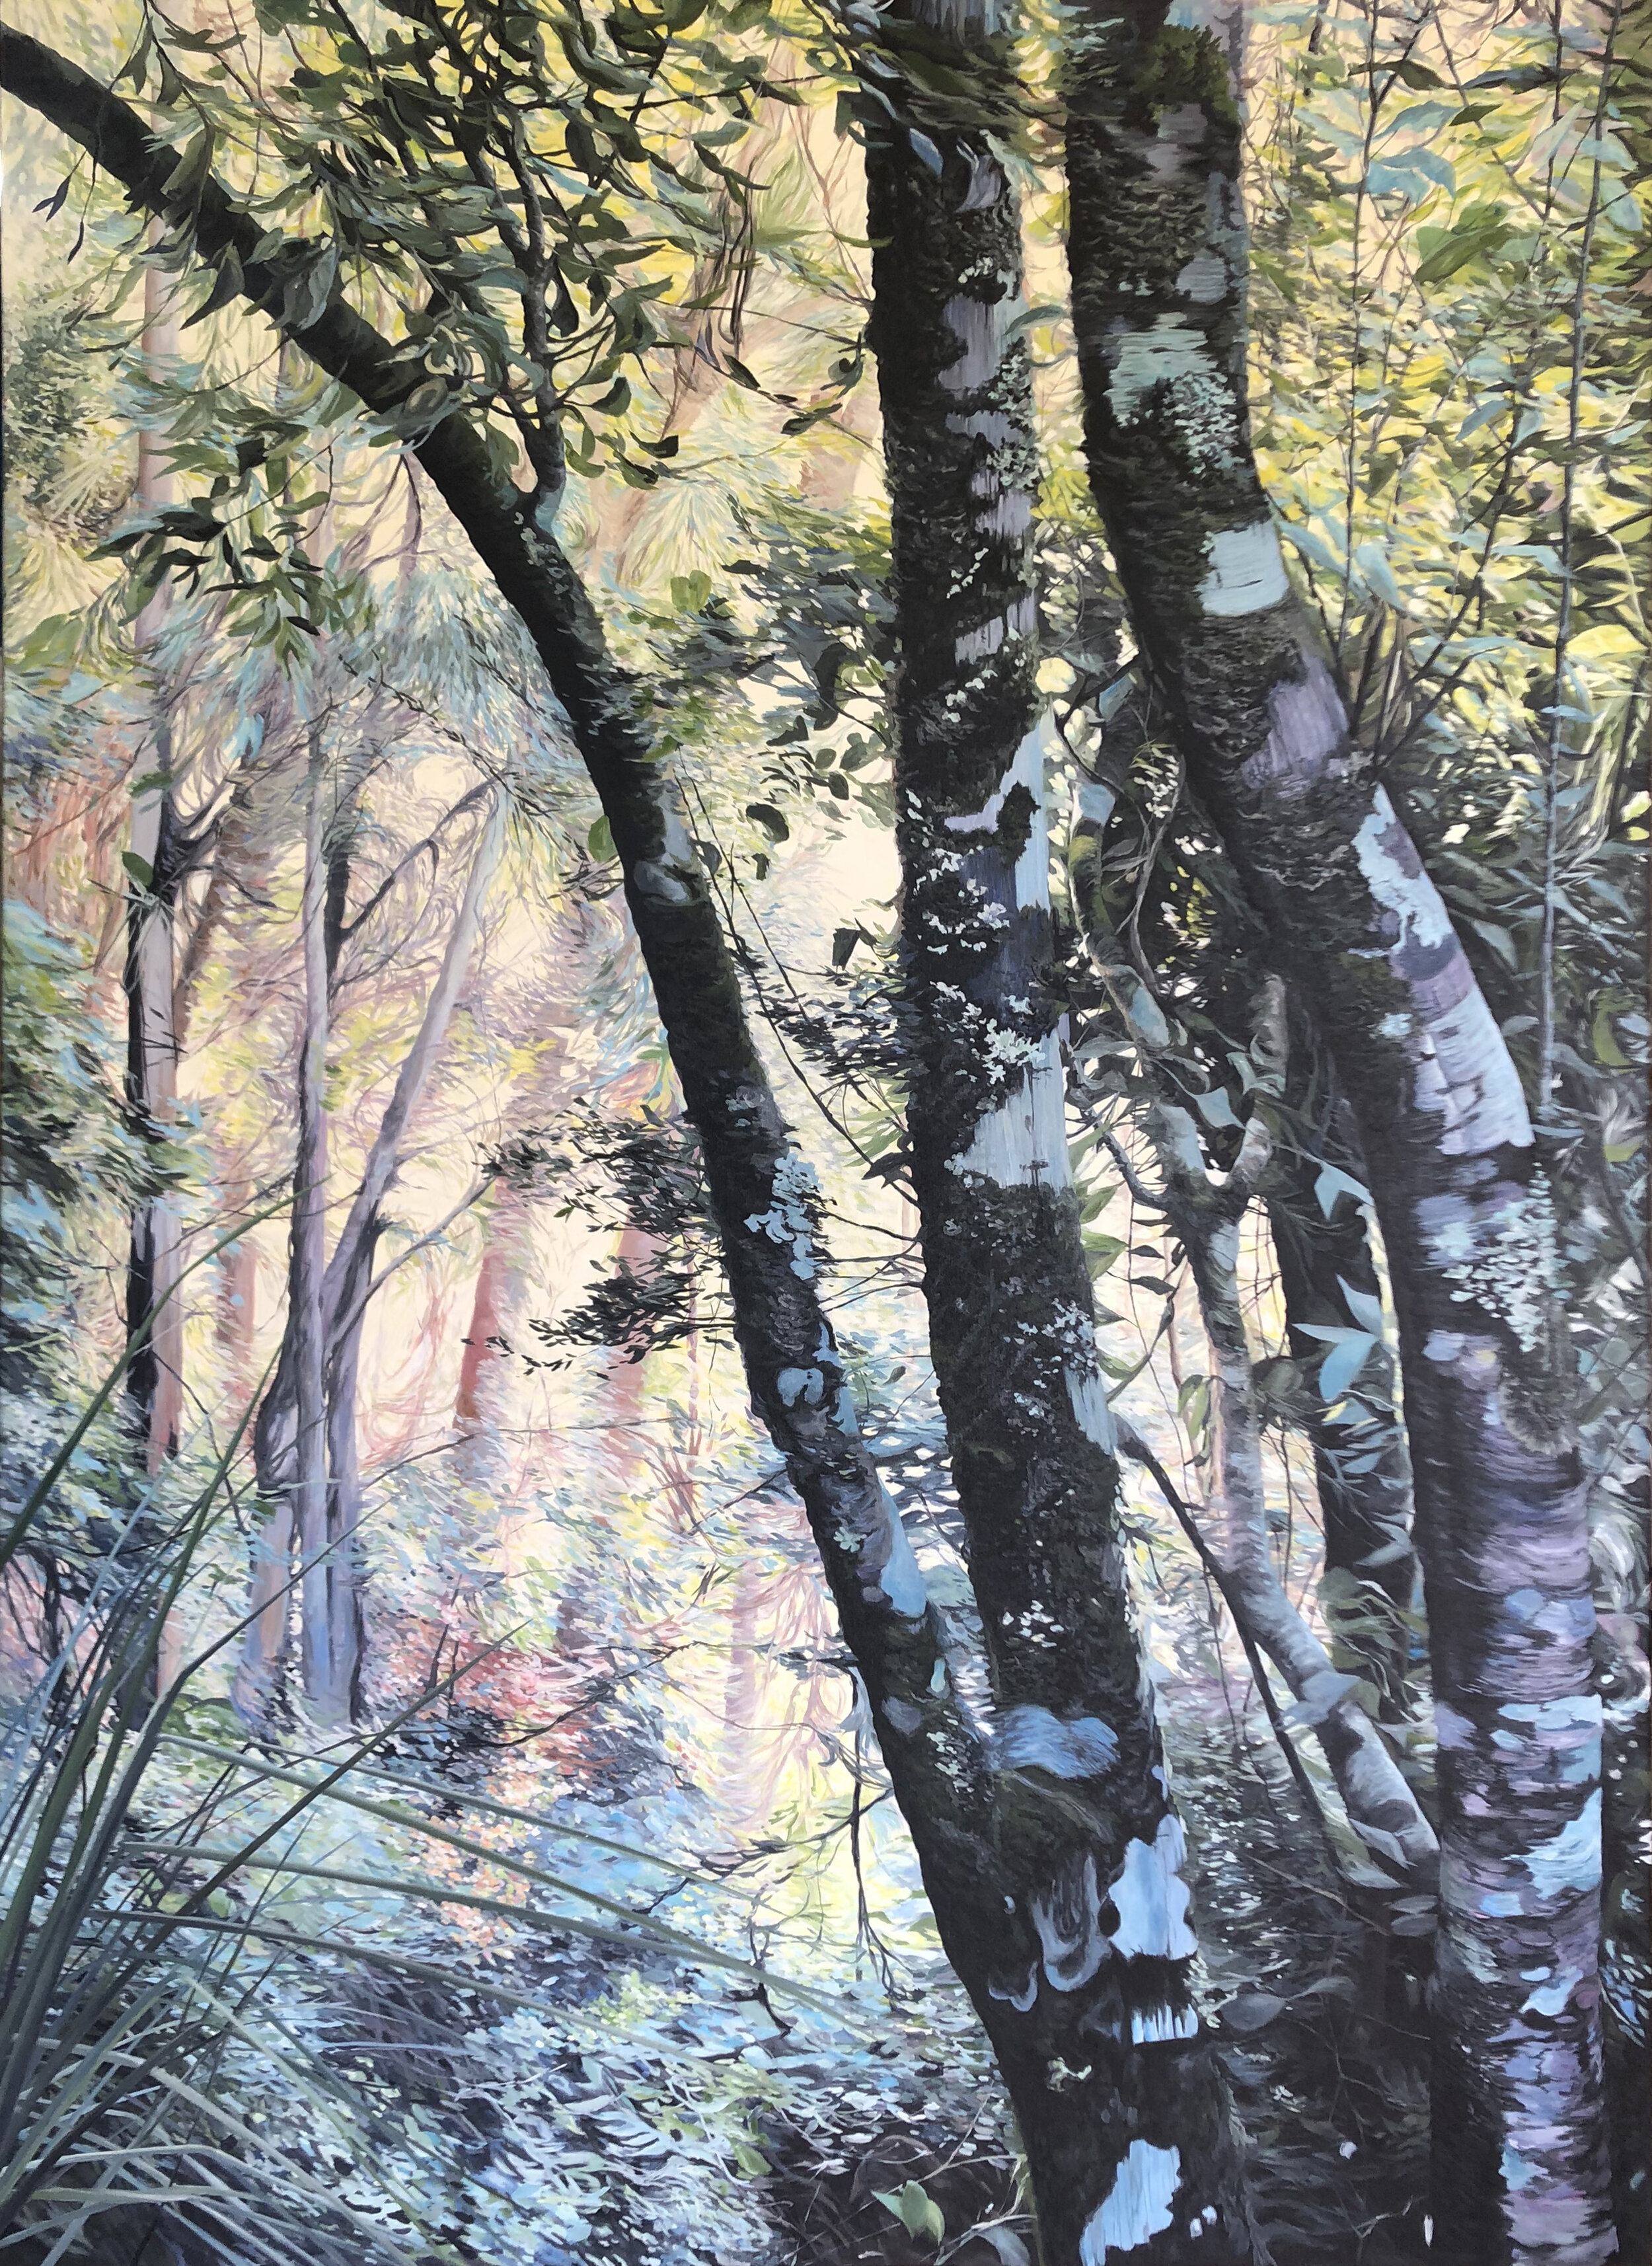   Cooling Glade  Oil on Canvas 163cm x 121cm SOLD 